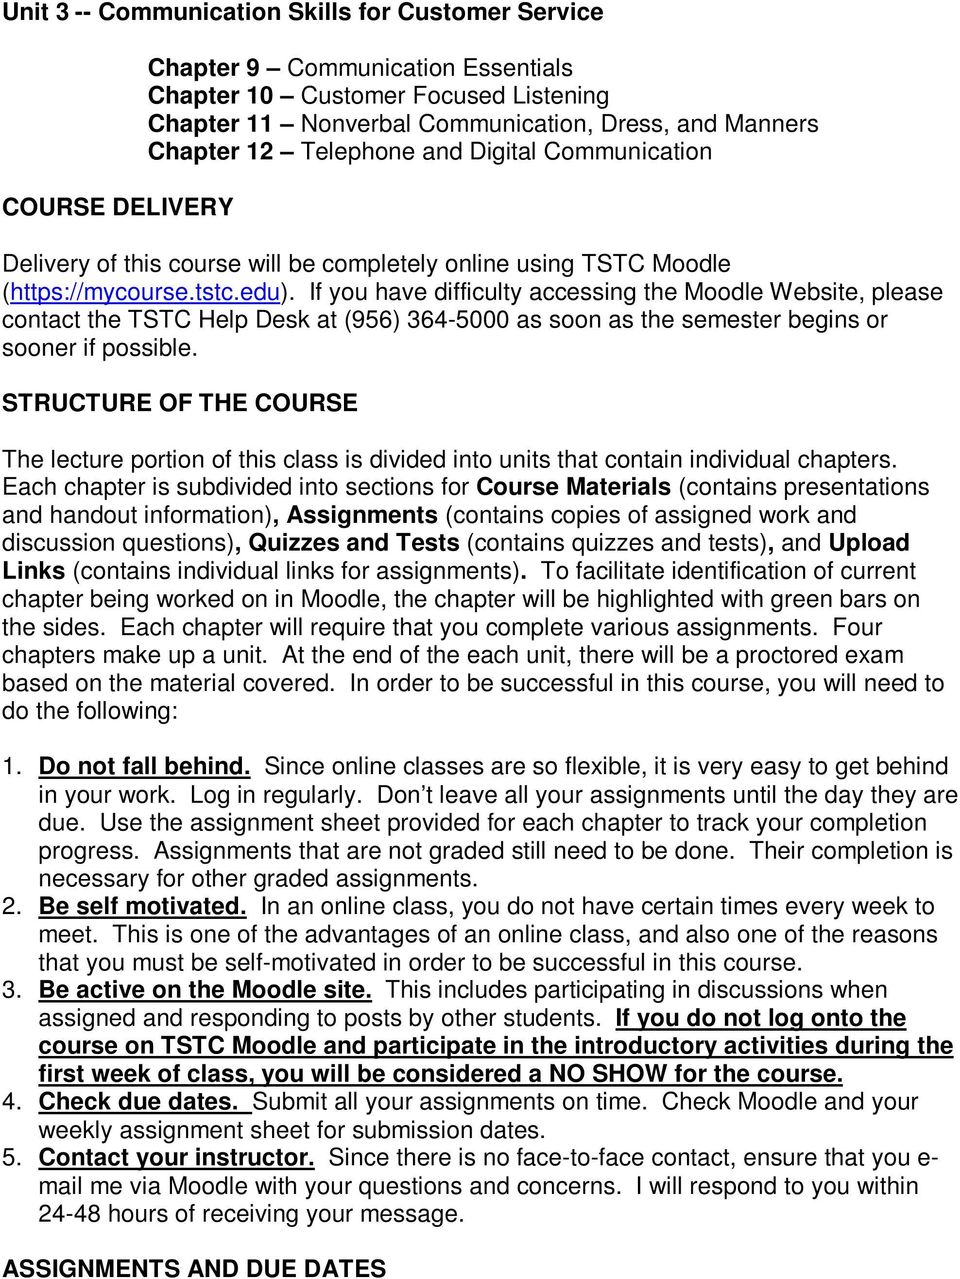 If you have difficulty accessing the Moodle Website, please contact the TSTC Help Desk at (956) 364-5000 as soon as the semester begins or sooner if possible.